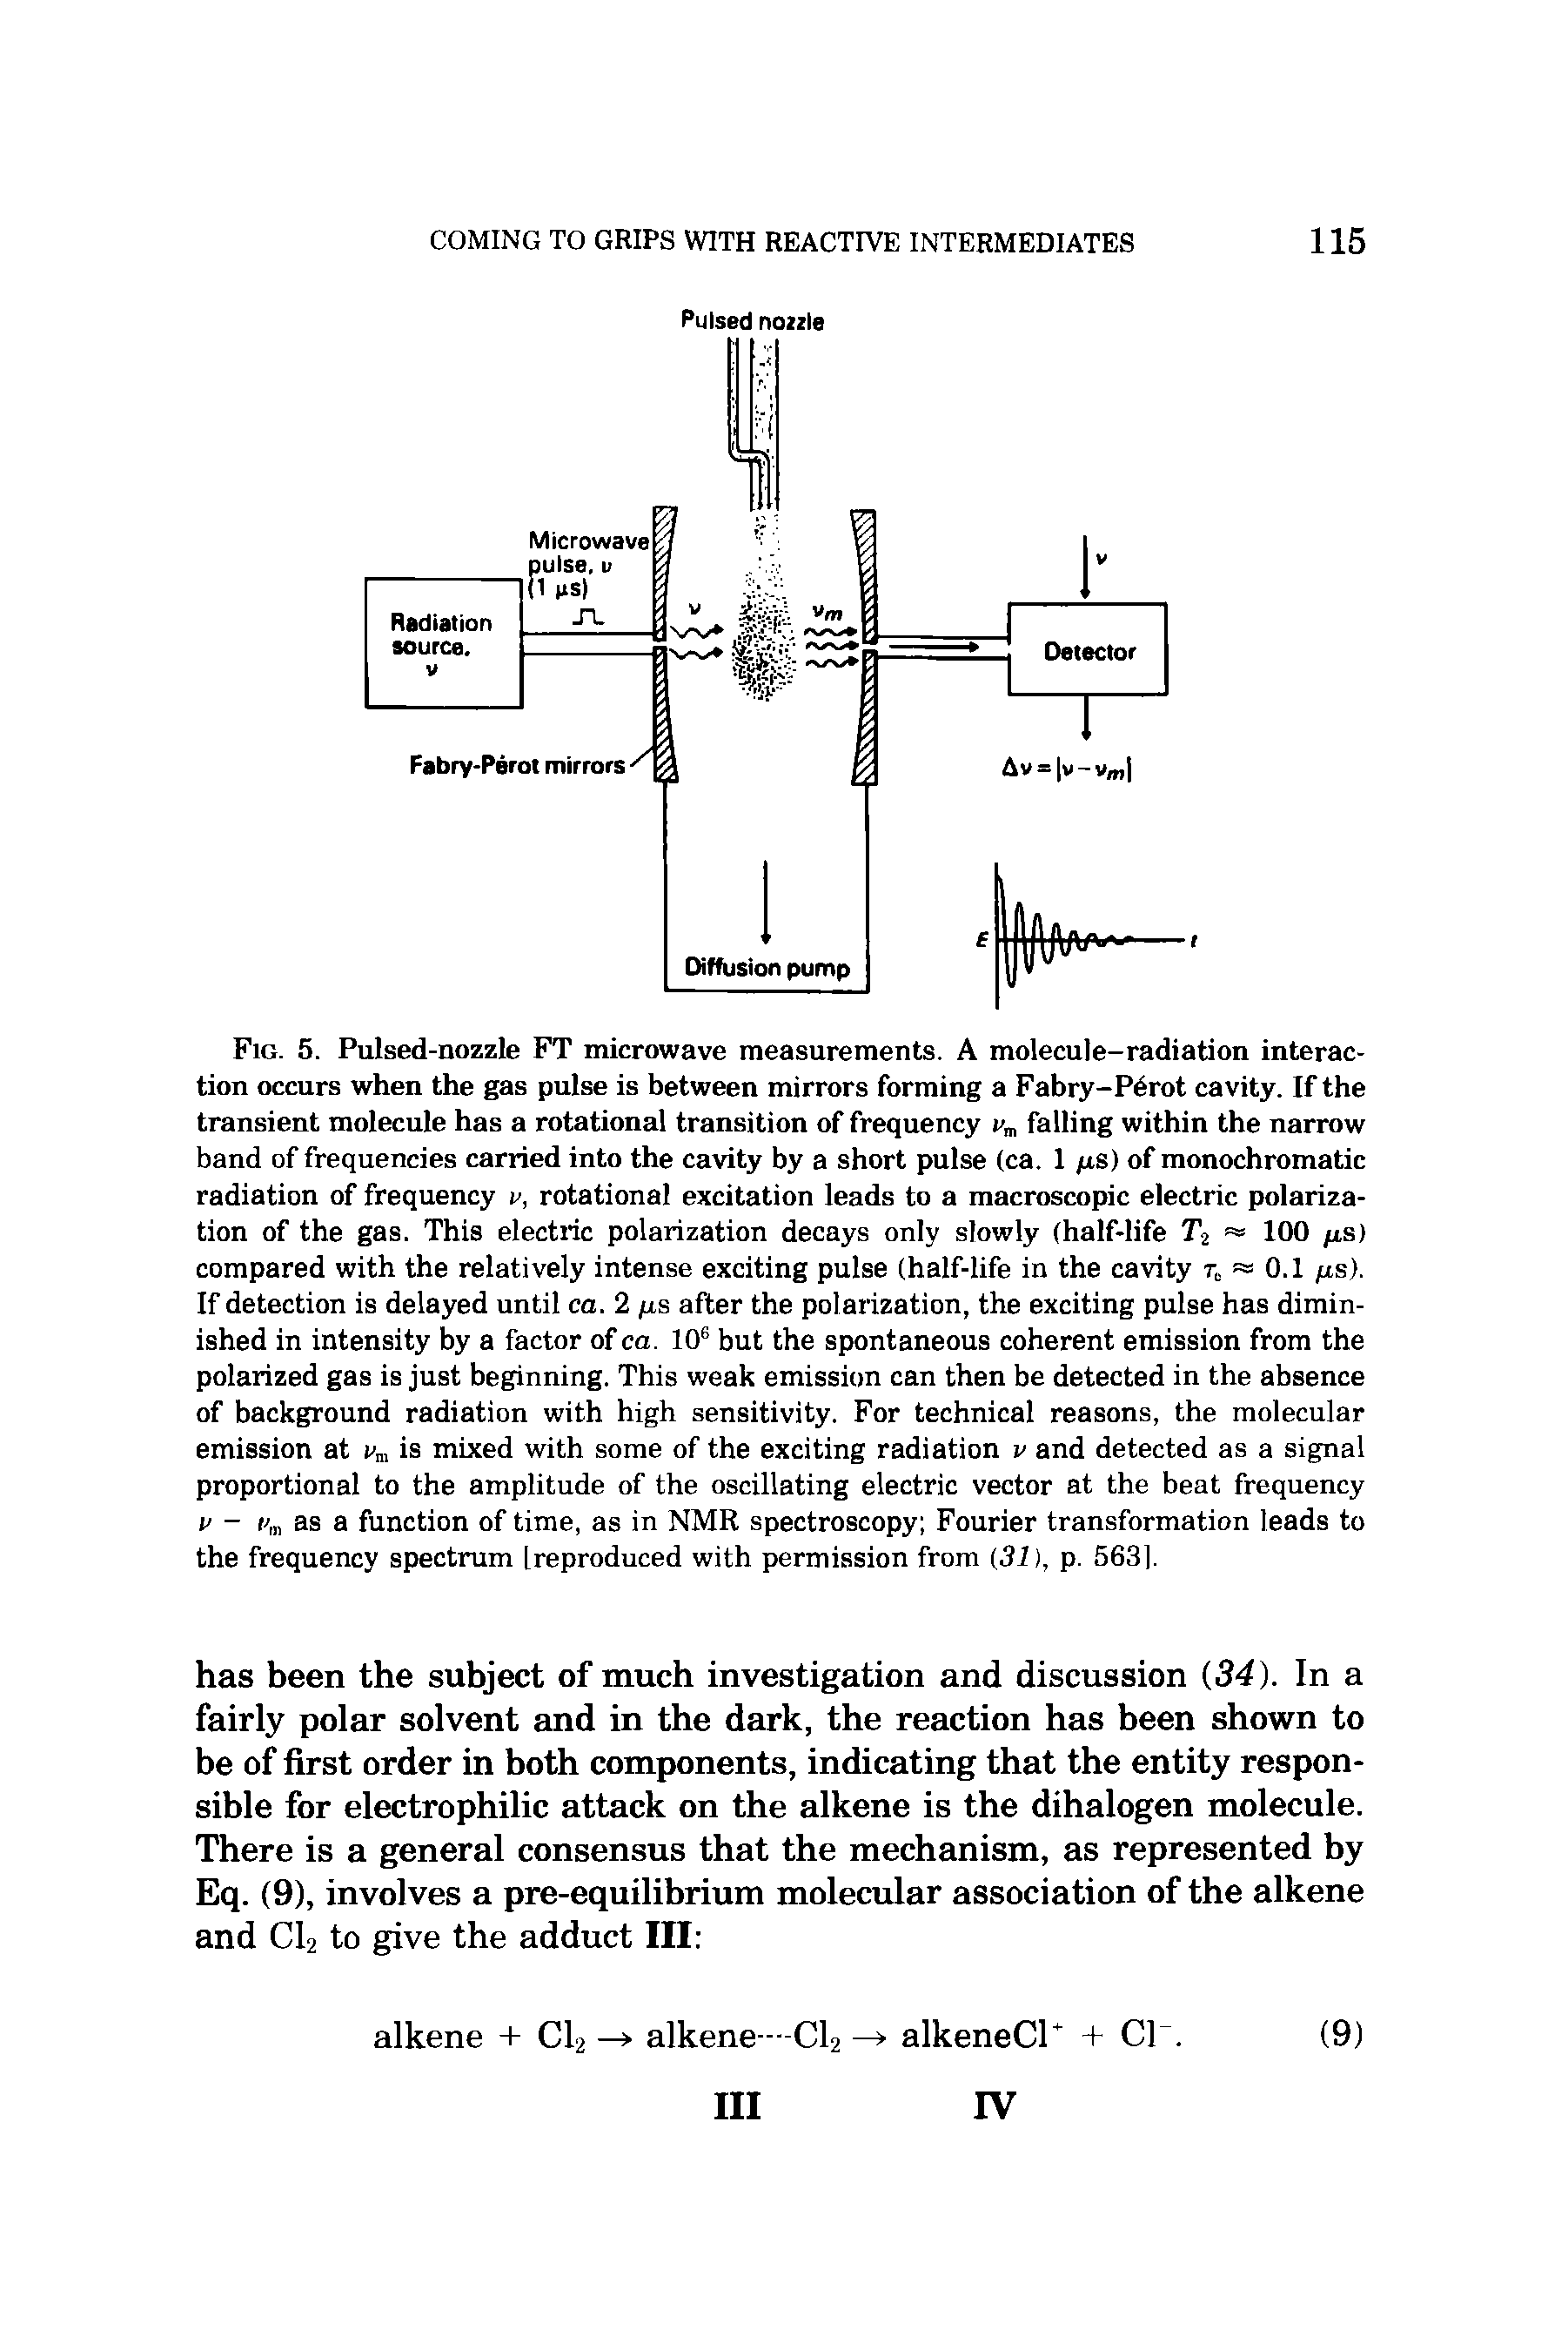 Fig. 5. Pulsed-nozzle FT microwave measurements. A molecule-radiation interaction occurs when the gas pulse is between mirrors forming a Fabry-Perot cavity. If the transient molecule has a rotational transition of frequency vm falling within the narrow band of frequencies carried into the cavity by a short pulse (ca. 1 (is) of monochromatic radiation of frequency v, rotational excitation leads to a macroscopic electric polarization of the gas. This electric polarization decays only slowly (half-life T2 = 100 (is) compared with the relatively intense exciting pulse (half-life in the cavity t 0.1 (is). If detection is delayed until ca. 2 (is after the polarization, the exciting pulse has diminished in intensity by a factor of ca. 106 but the spontaneous coherent emission from the polarized gas is just beginning. This weak emission can then be detected in the absence of background radiation with high sensitivity. For technical reasons, the molecular emission at vm is mixed with some of the exciting radiation v and detected as a signal proportional to the amplitude of the oscillating electric vector at the beat frequency v - r , as a function of time, as in NMR spectroscopy Fourier transformation leads to the frequency spectrum [reproduced with permission from (31), p. 5631.